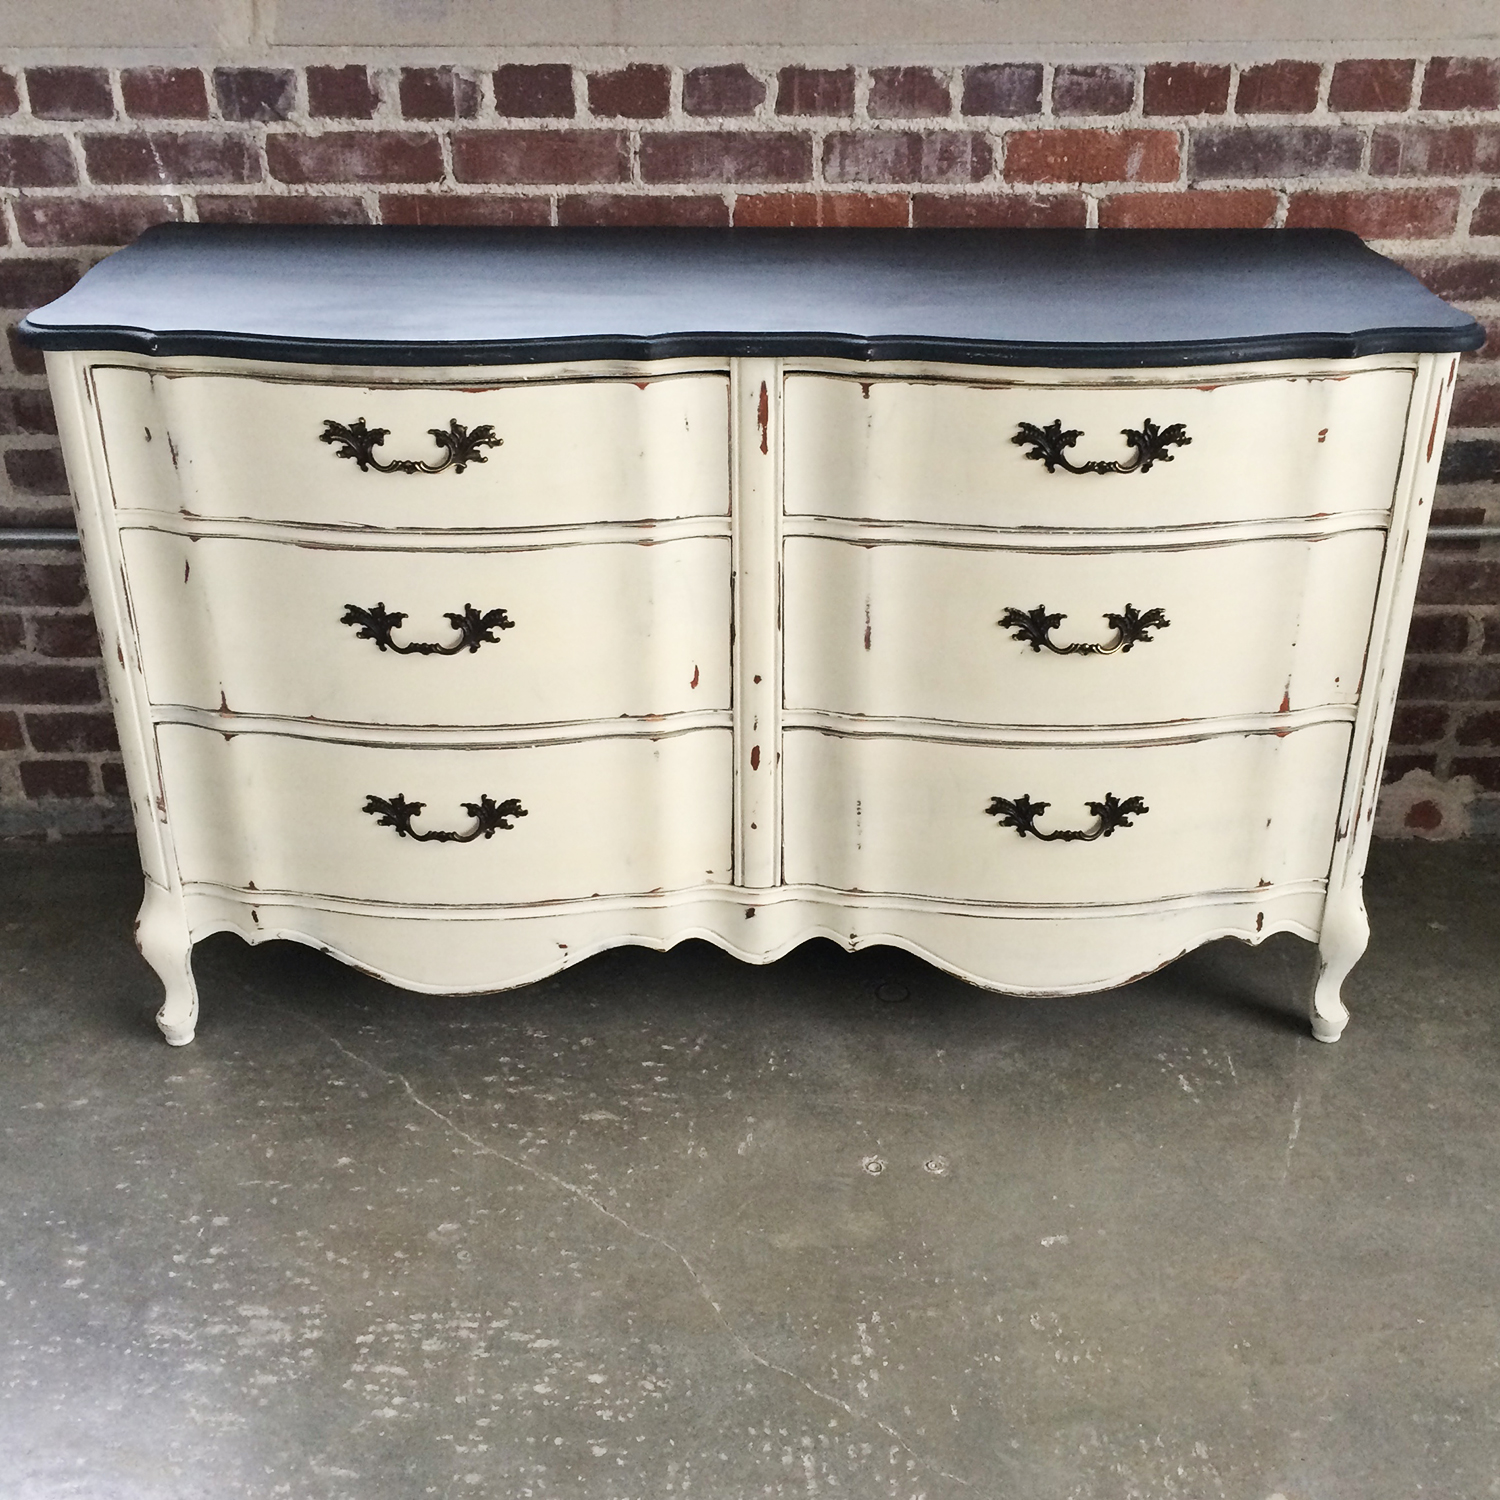 French Provincial With A Little Edge Two Toned Dresser A